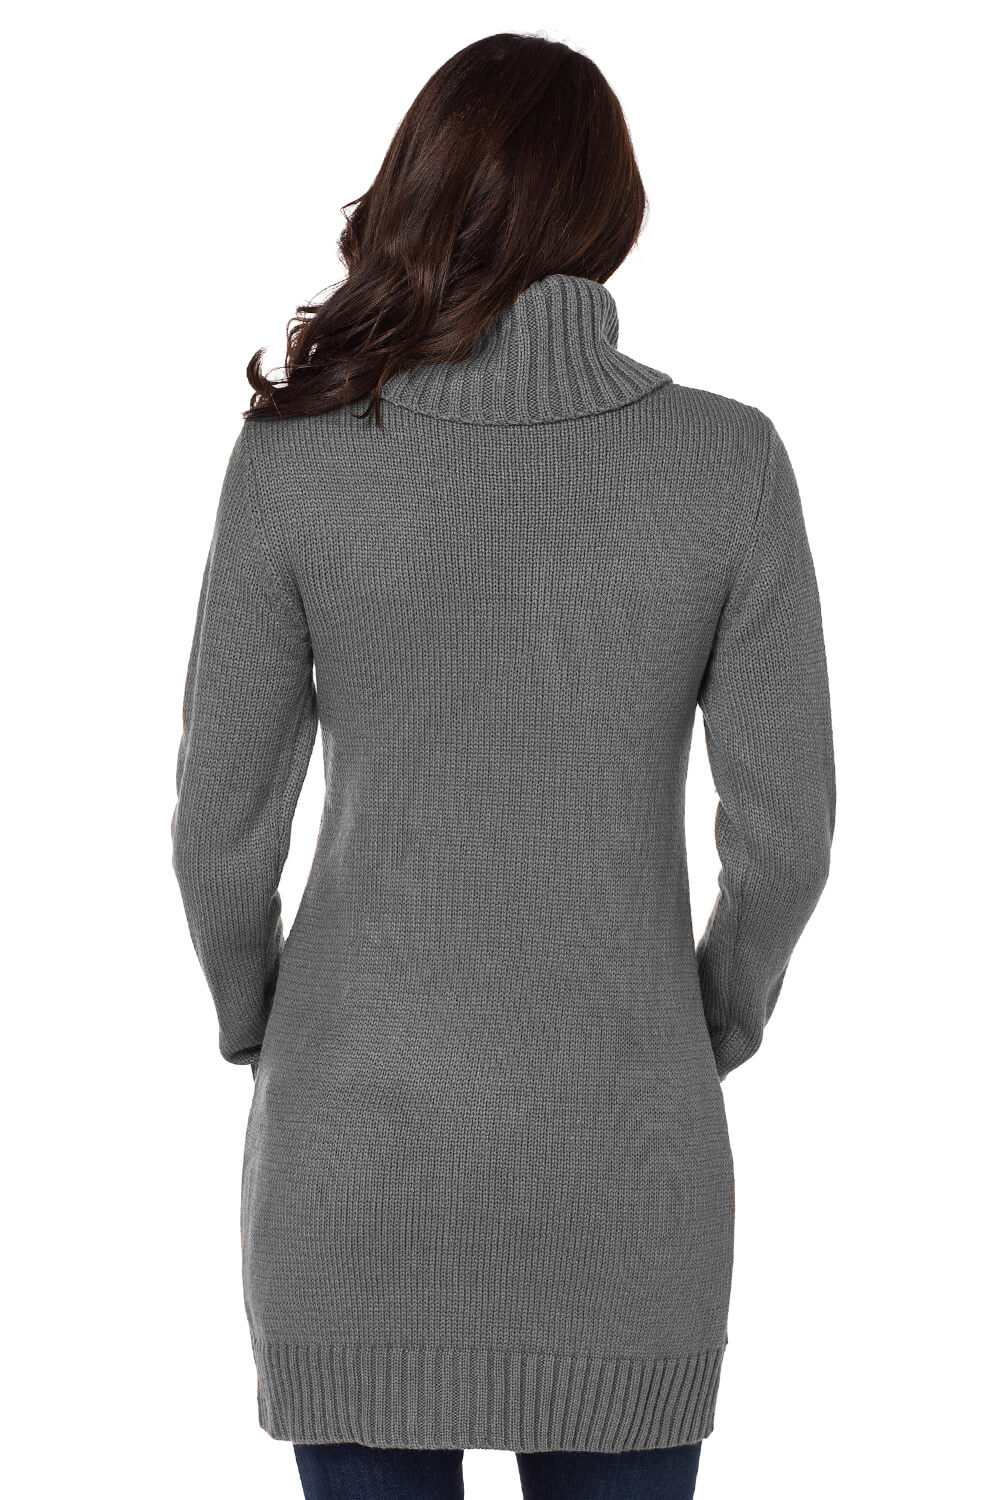 Colorblock Cowl Neck Cable Knit Sweater Dress